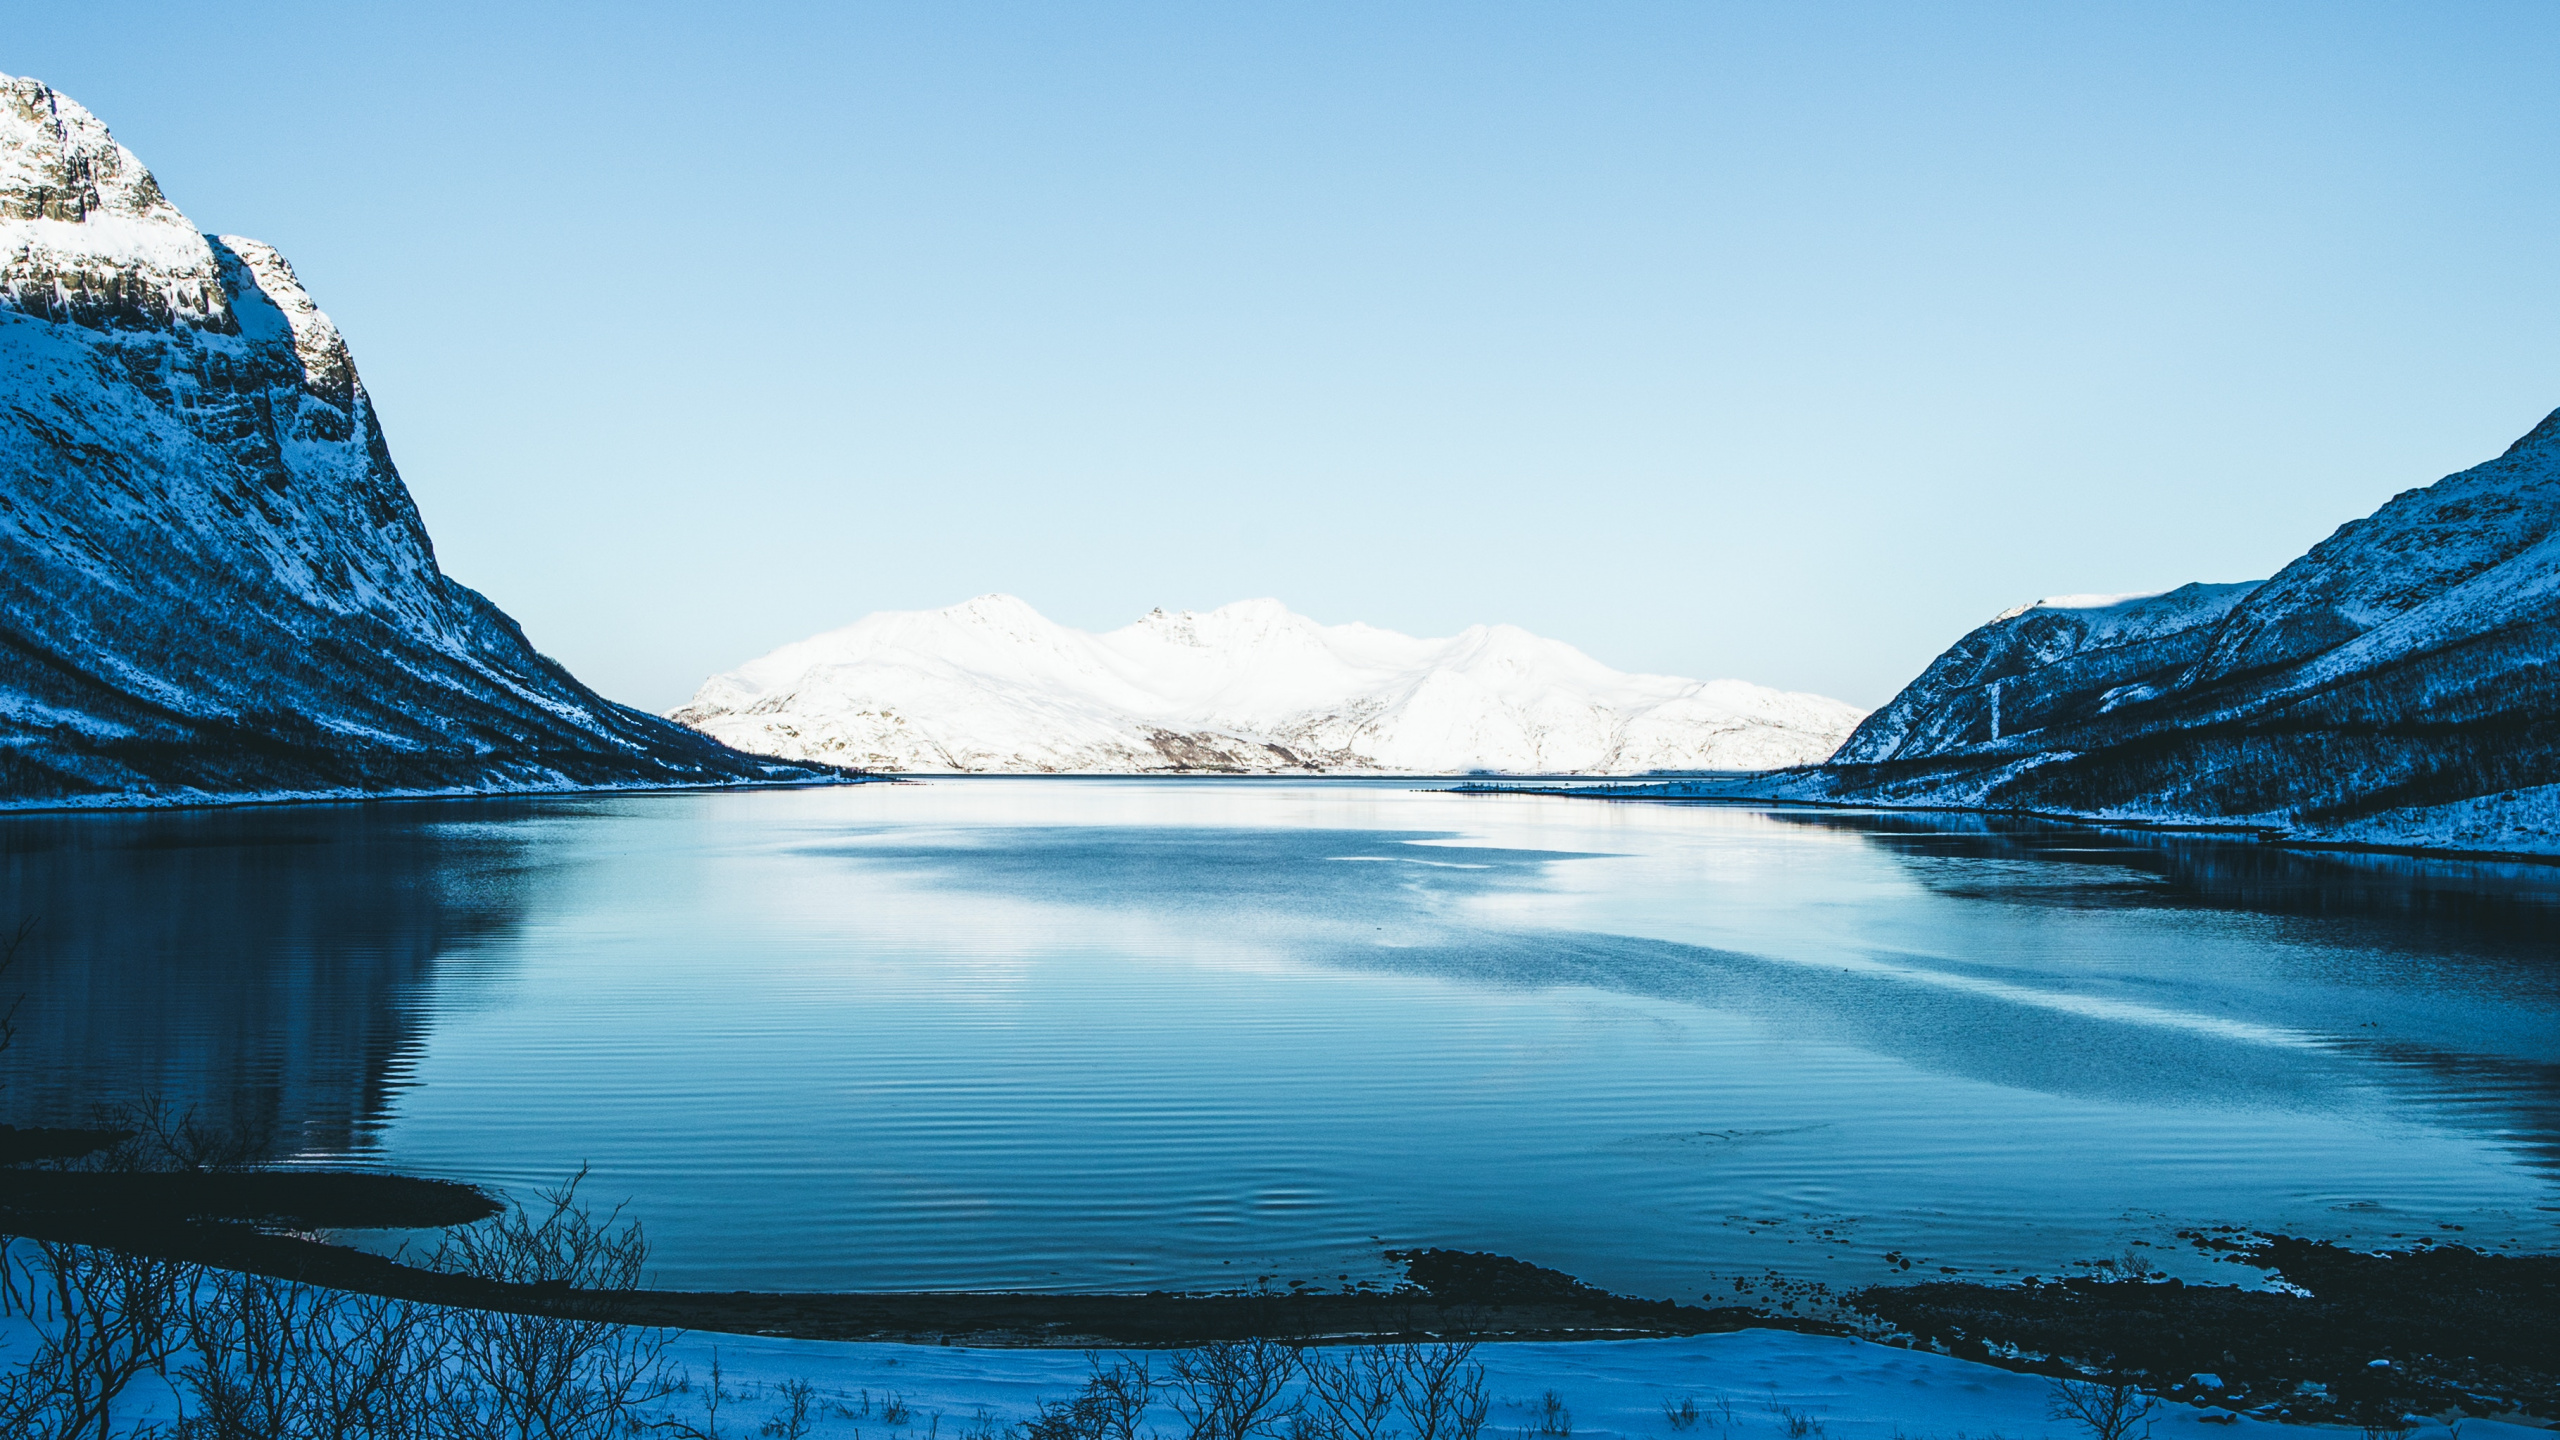 Winter, Nature, Body of Water, Natural Landscape, Blue. Wallpaper in 2560x1440 Resolution